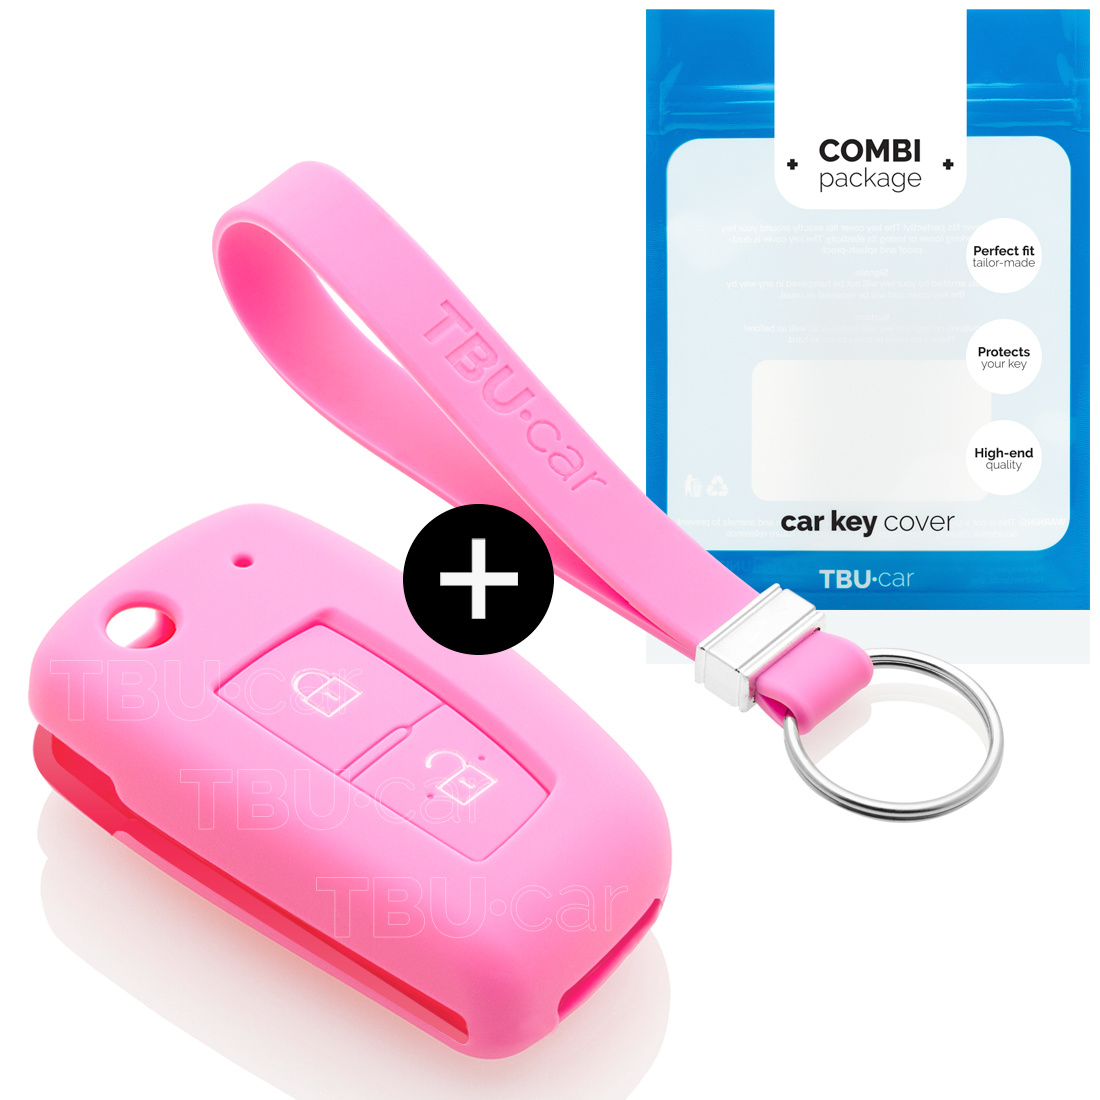 TBU car TBU car Car key cover compatible with Nissan - Silicone Protective Remote Key Shell - FOB Case Cover - Pink